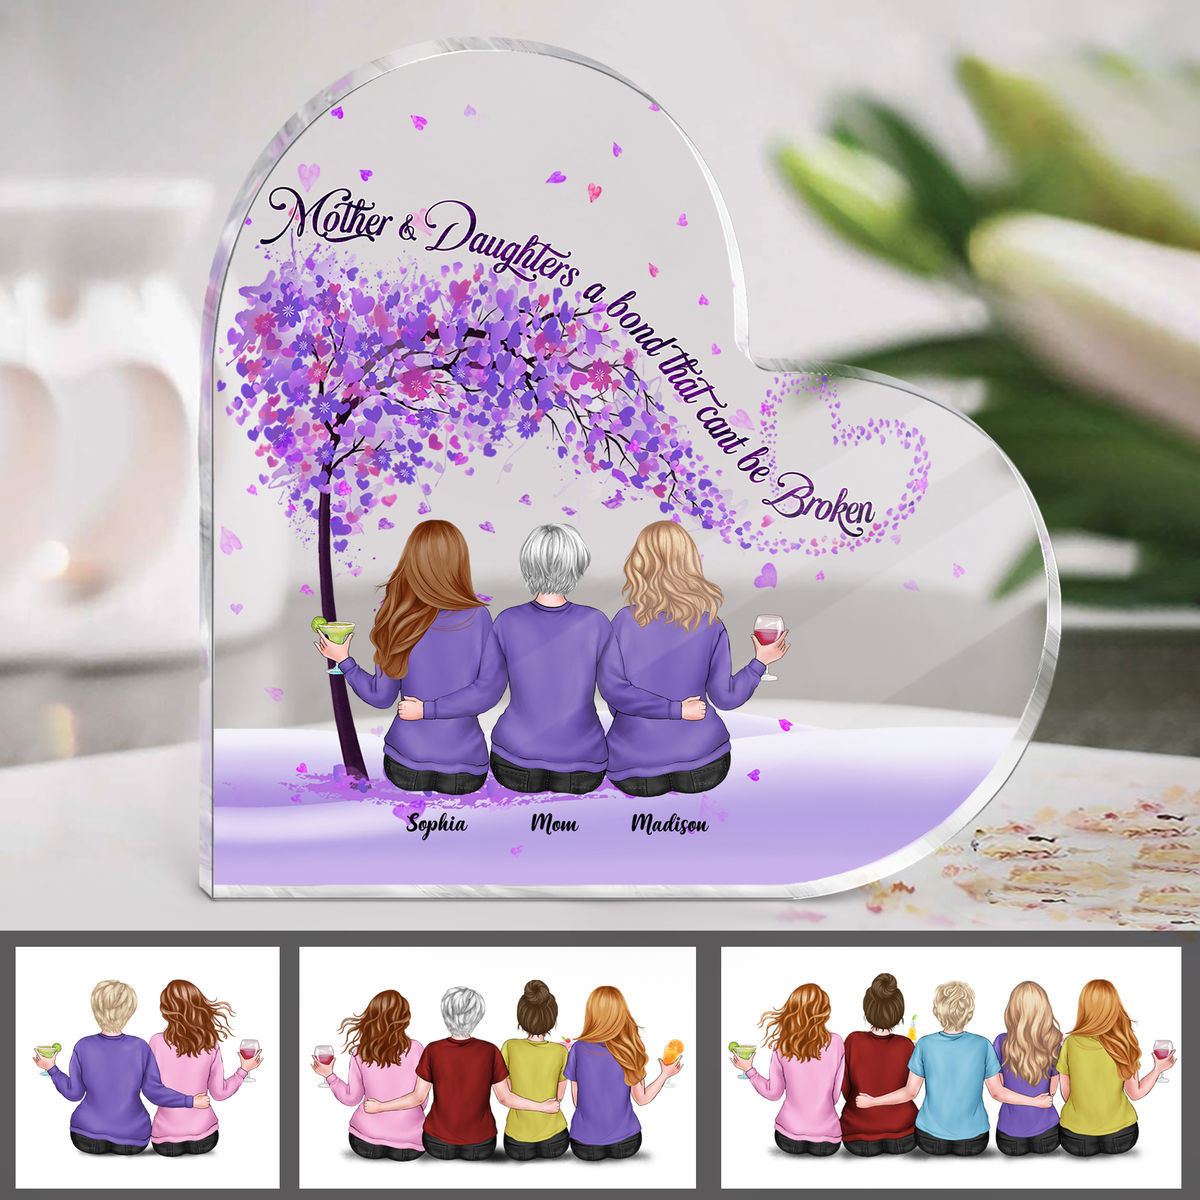 Personalized Desktop - Heart Transparent Plaque - Mother and Daughters a bond that can't be broken (23518)